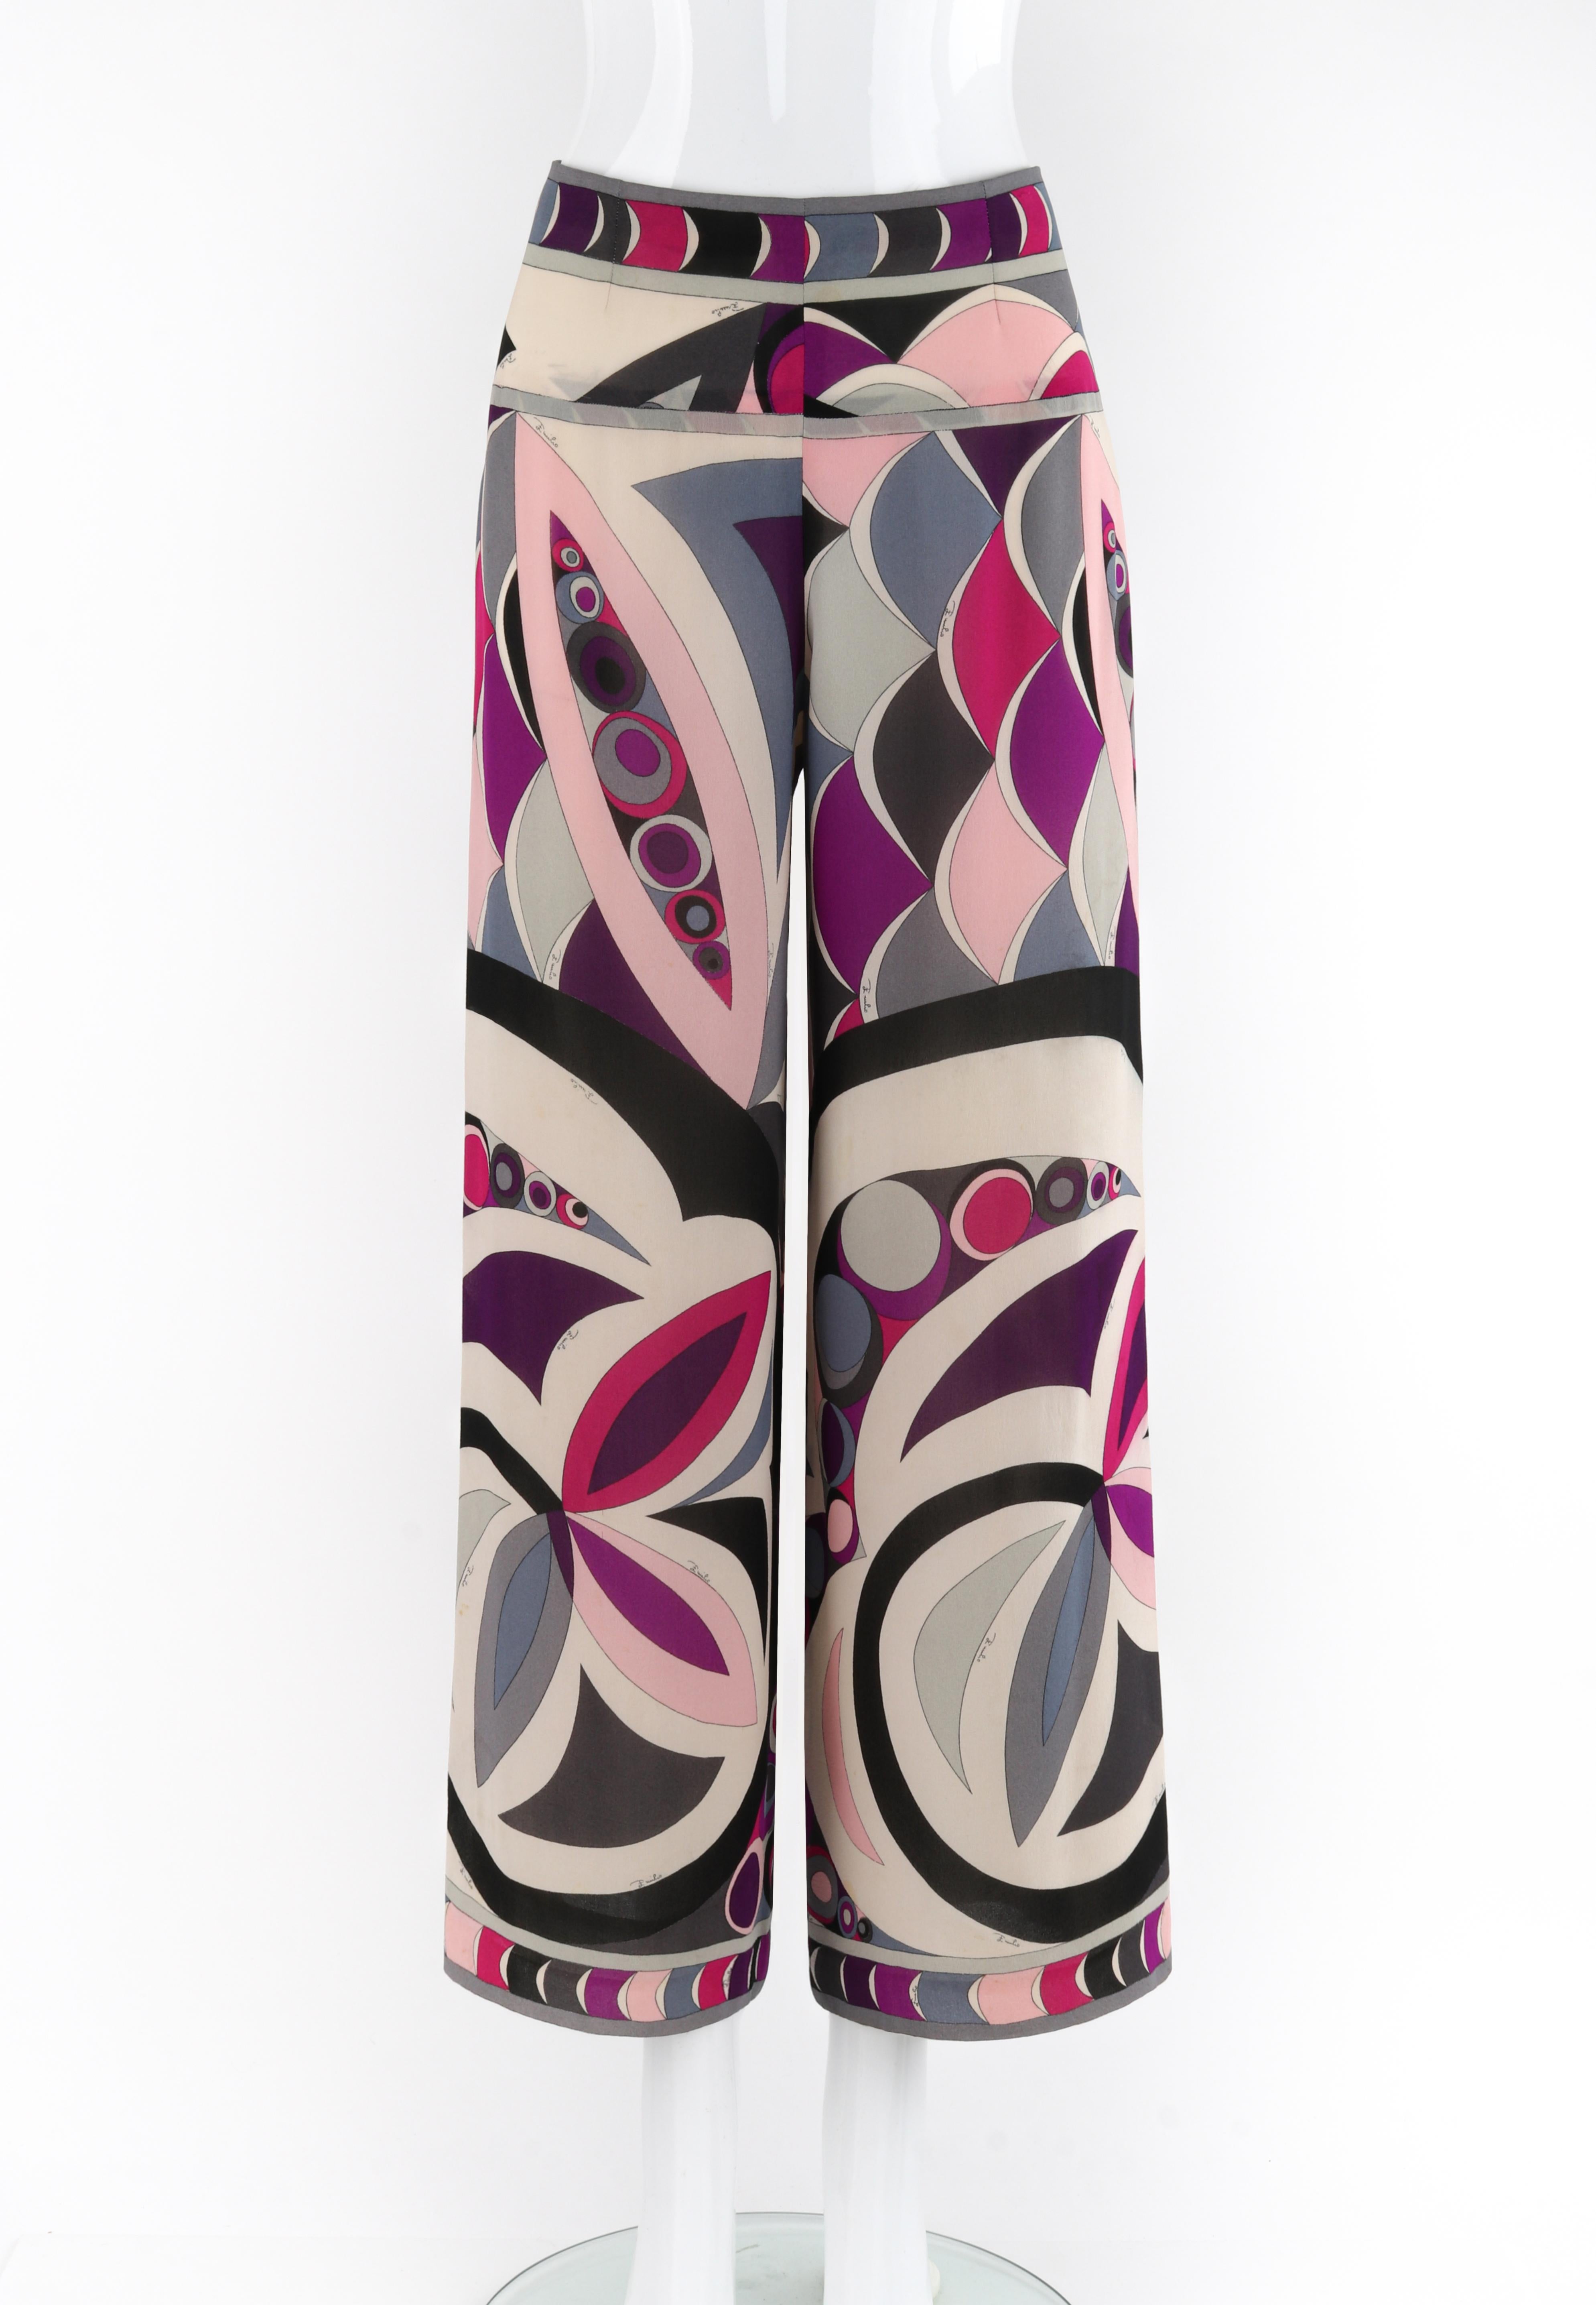 Brand / Manufacturer: Emilio Pucci
Circa: 1960s
Designer: Emilio Pucci 
Style: Trouser pants
Color(s): Shades of gray, purple, pink, black, white
Lined: No
Marked Fabric Content: 